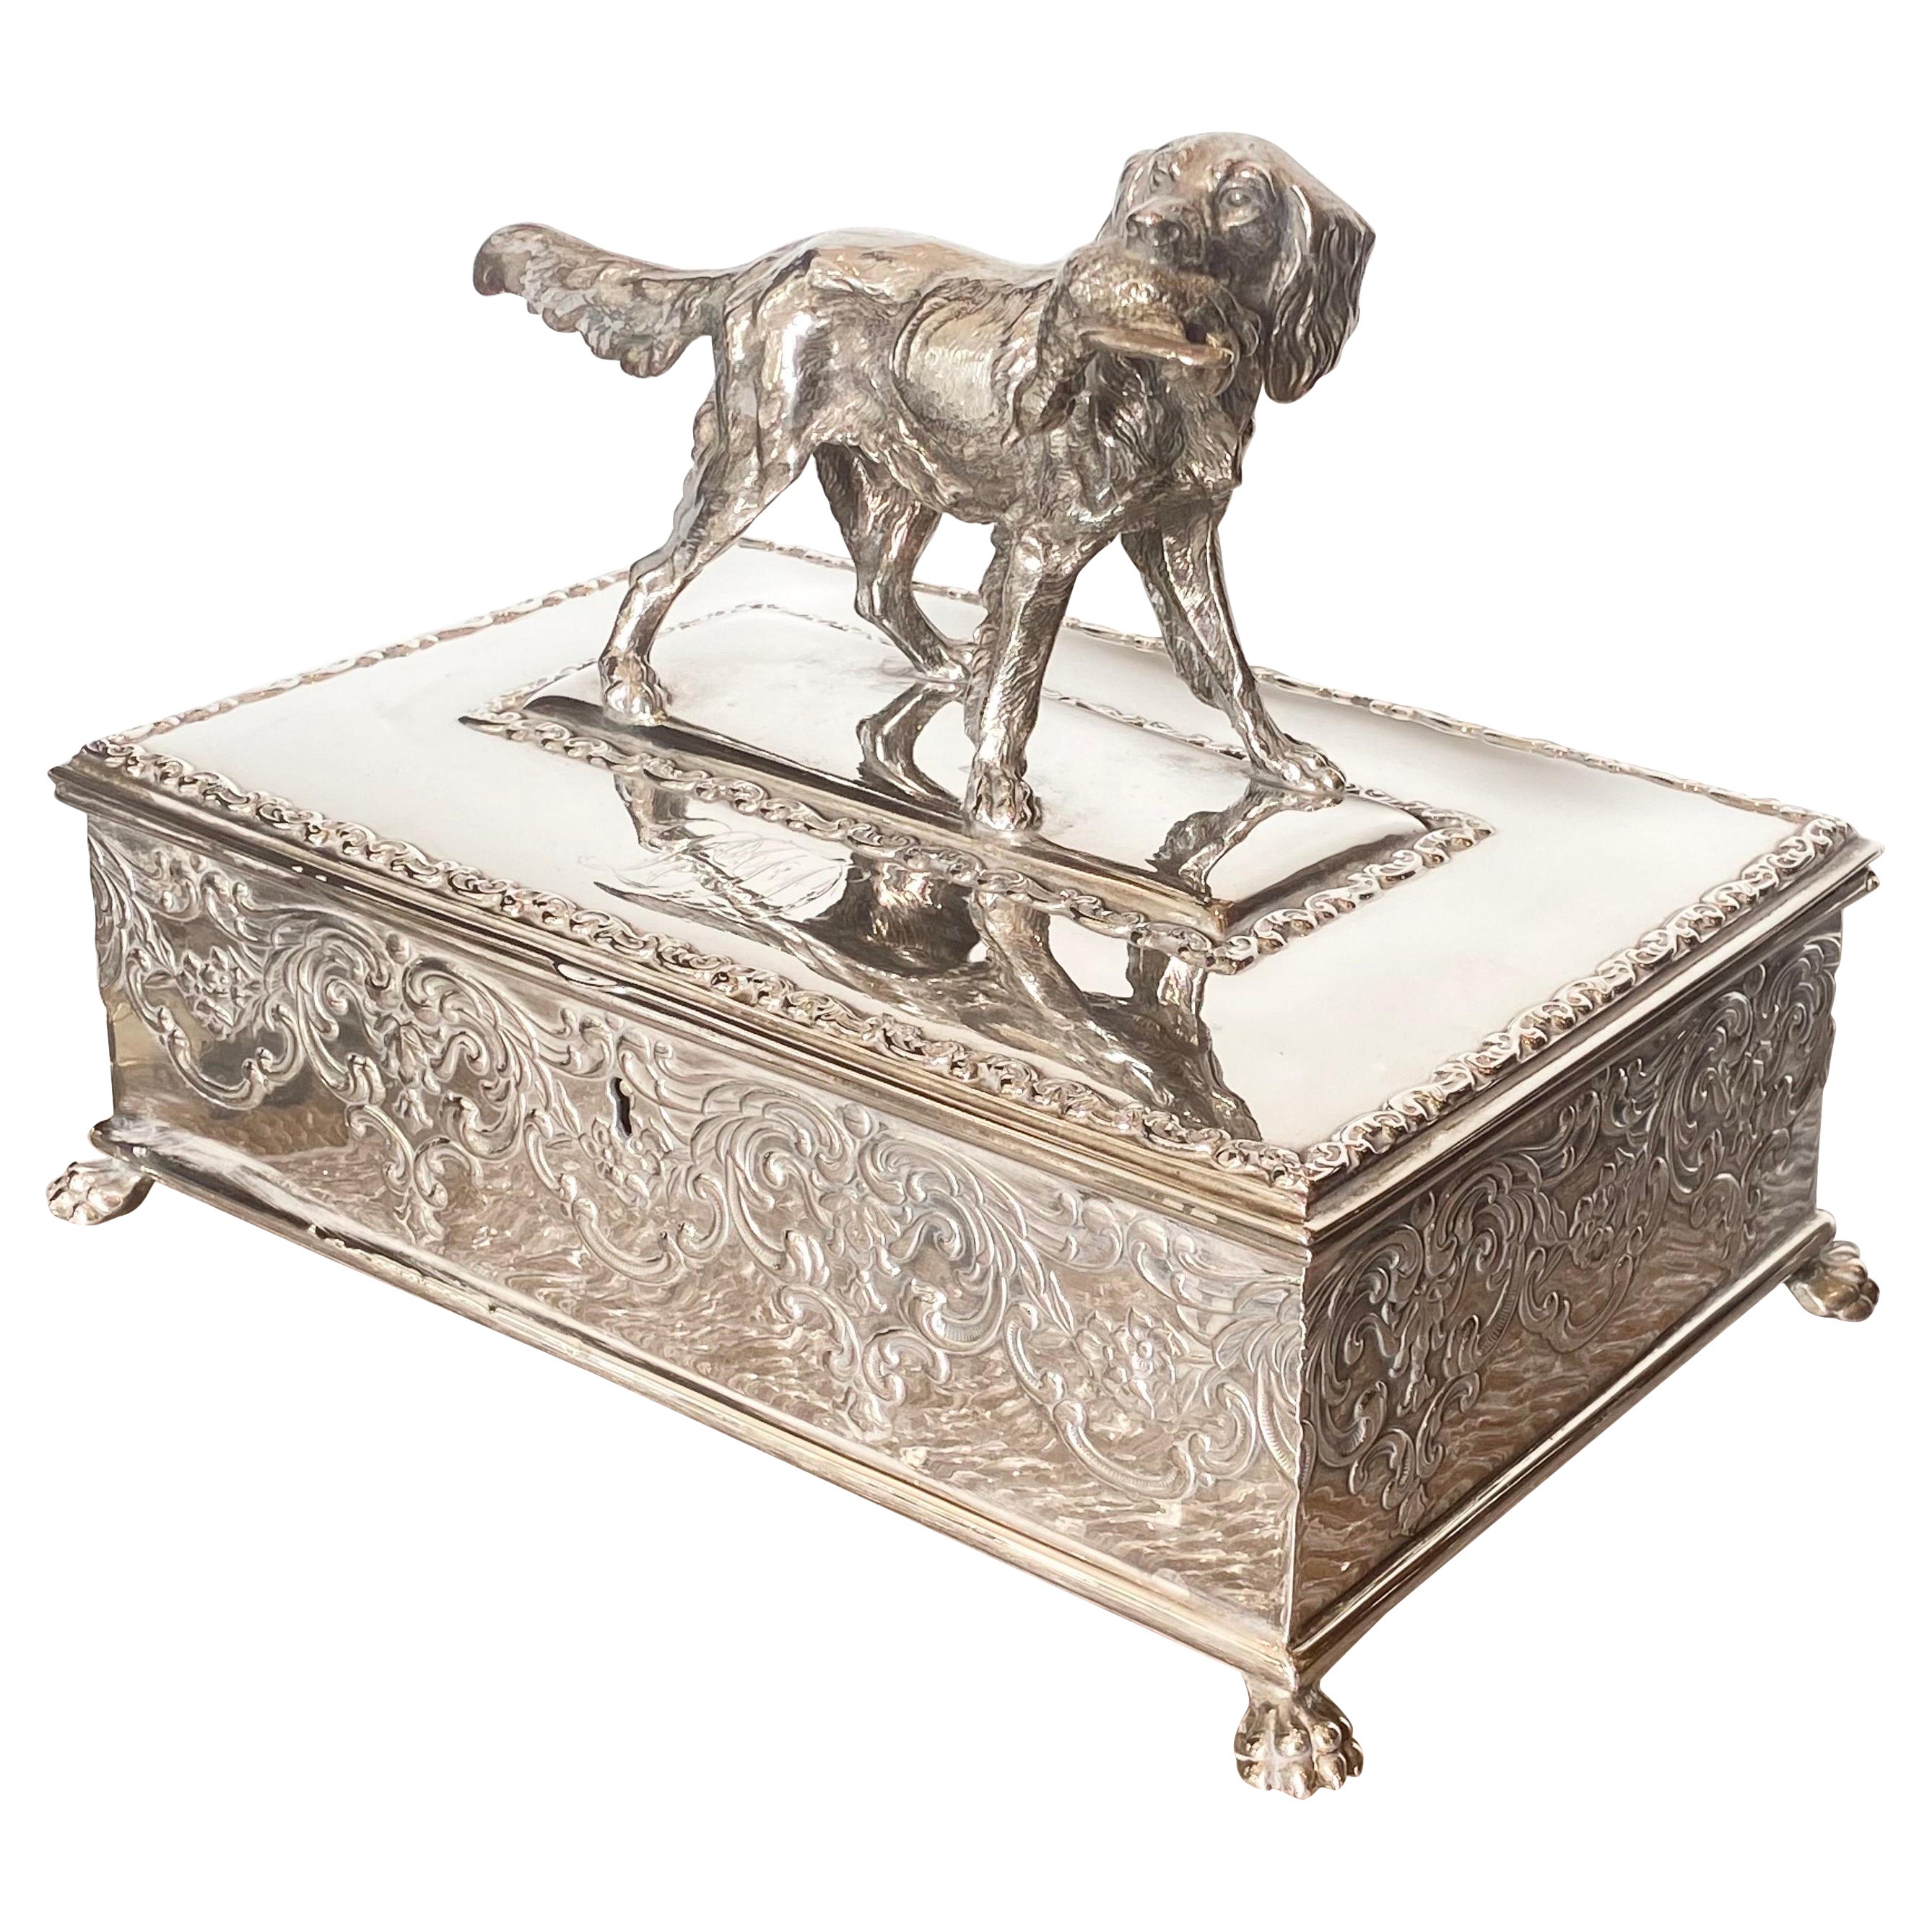 Silver Plate Humidor with Retriever